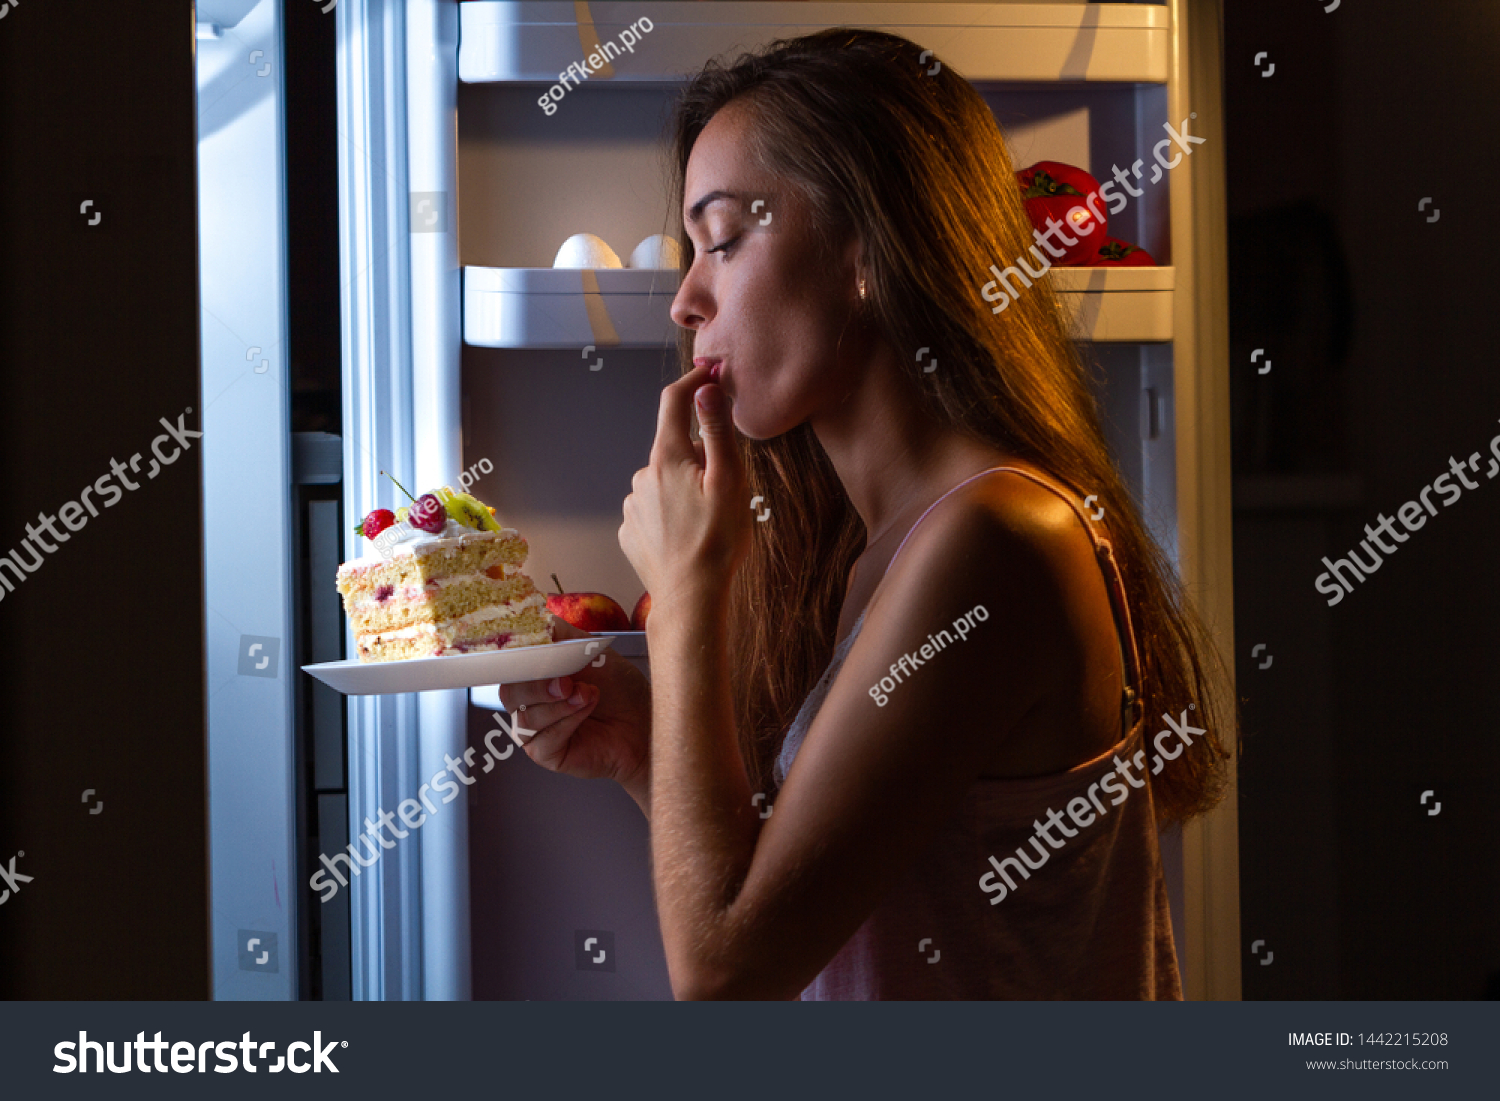 Hungry woman in pajamas enjoys sweet cake at night near refrigerator. Stop diet and gain extra pounds due to high carbs food and unhealthy eating #1442215208